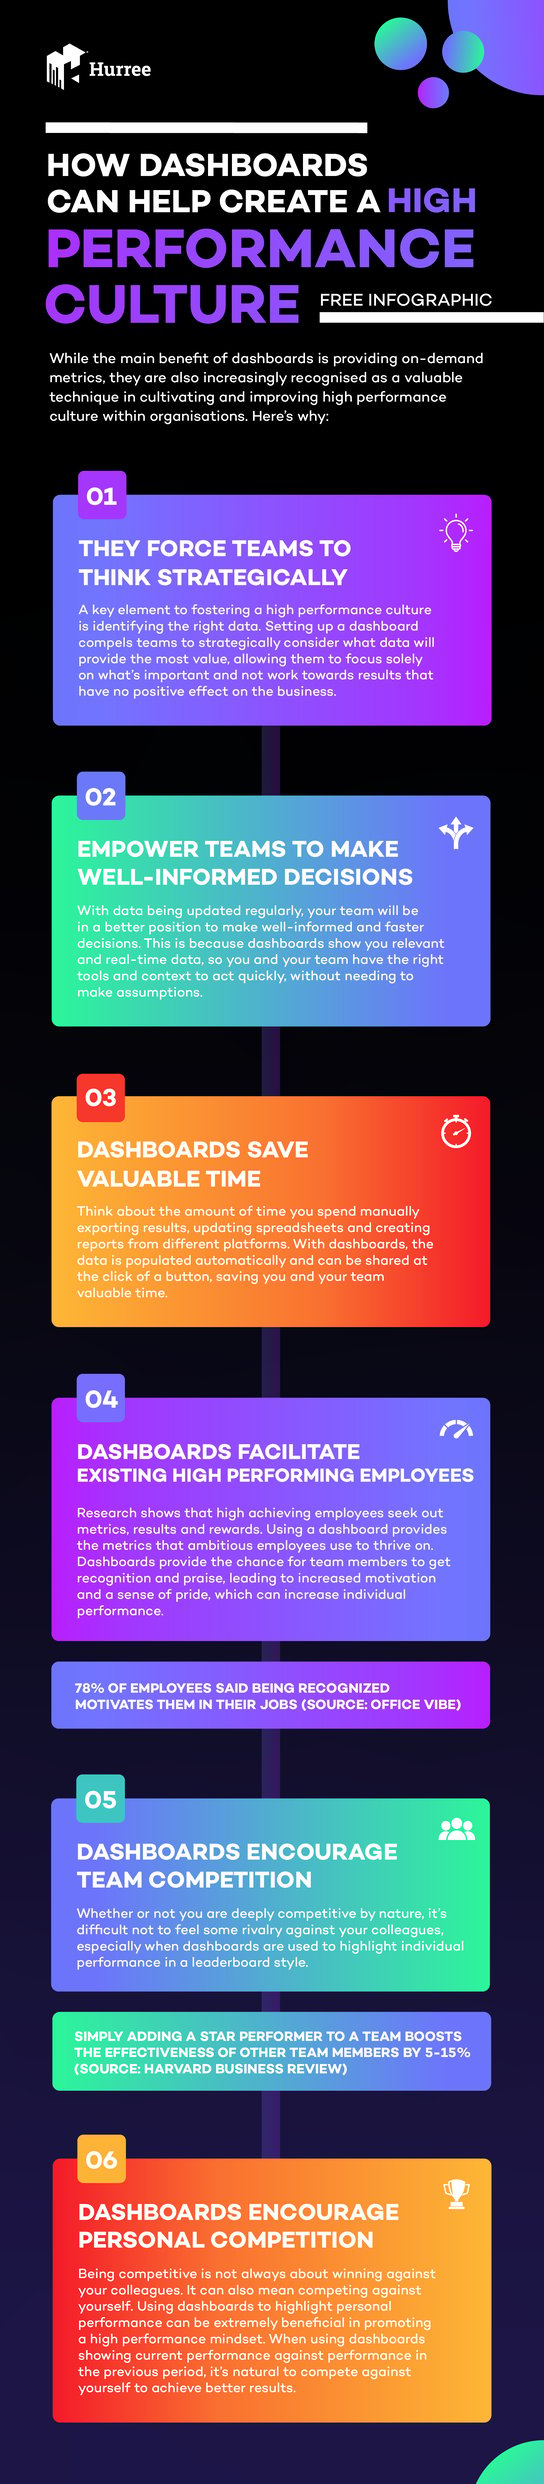 How dashboards can help create a high performance culture infographic